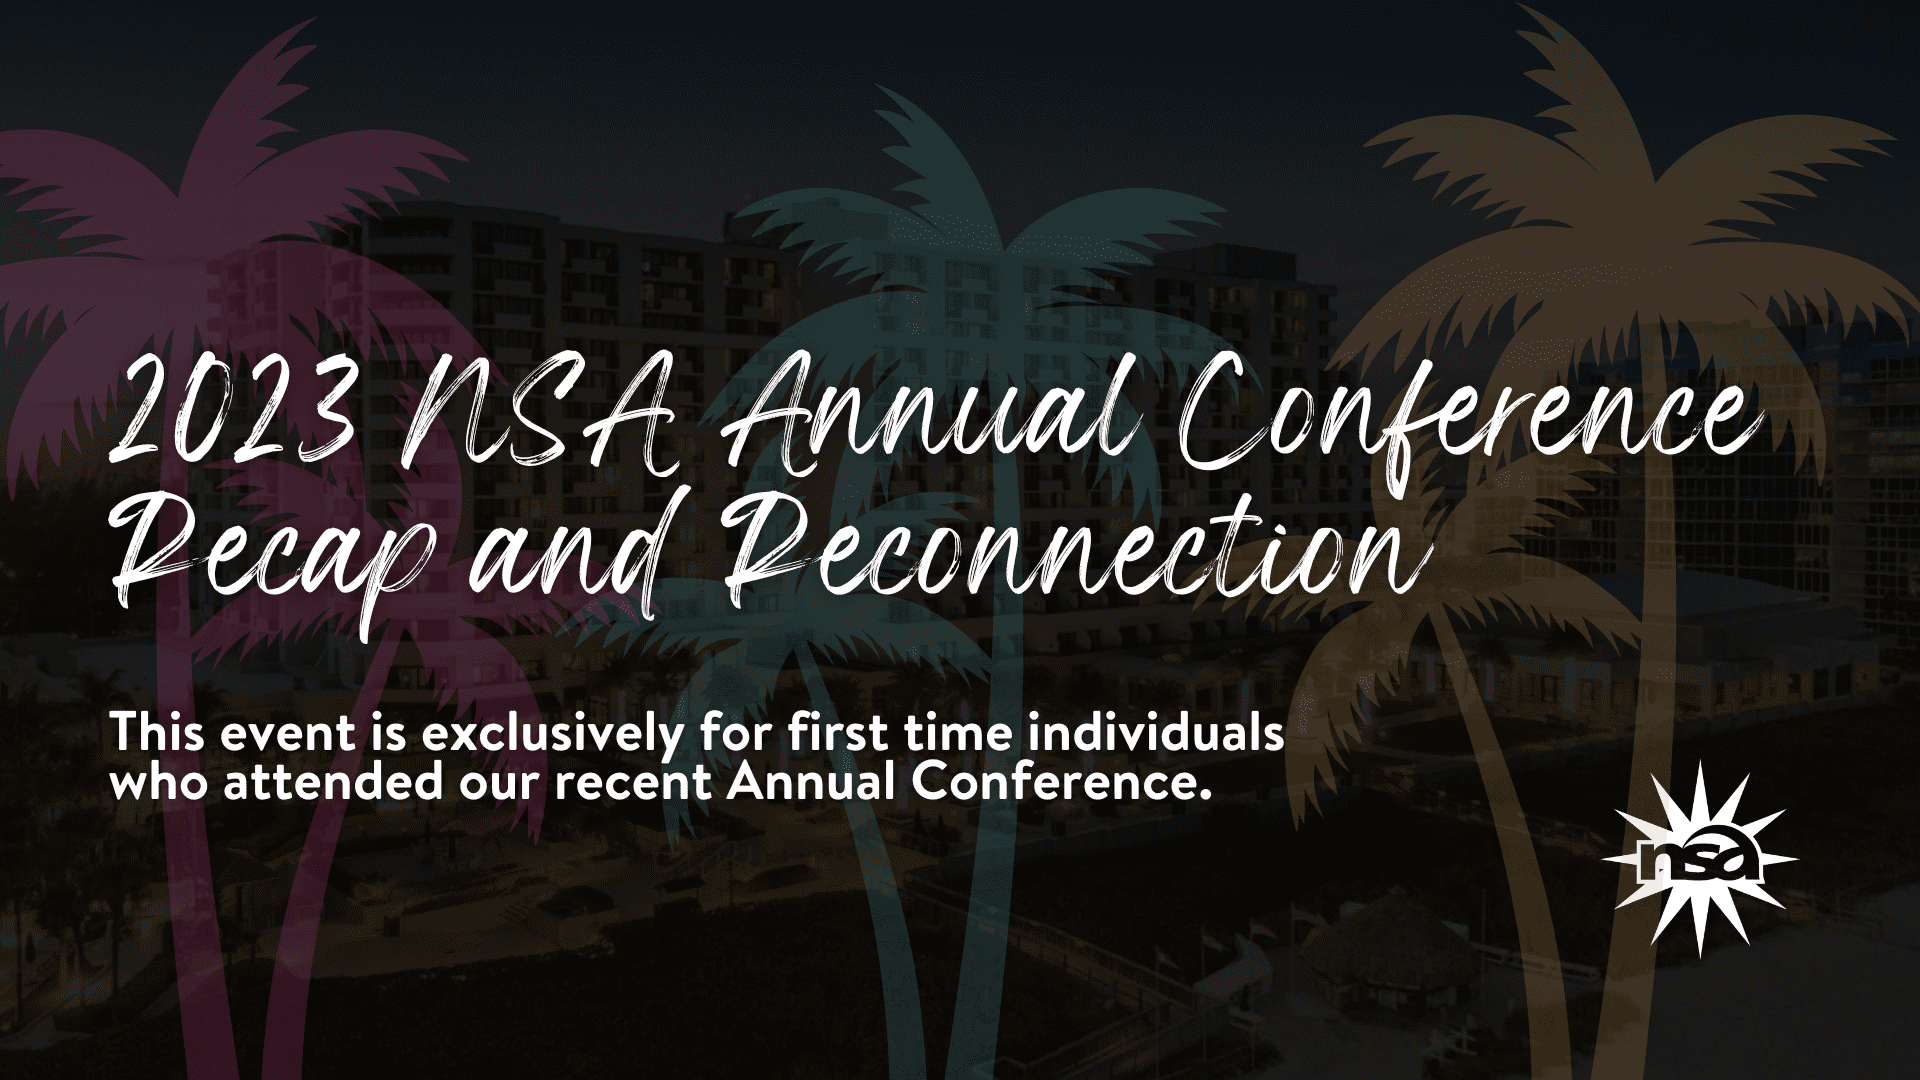 2023 NSA Annual Conference Recap and Reconnection